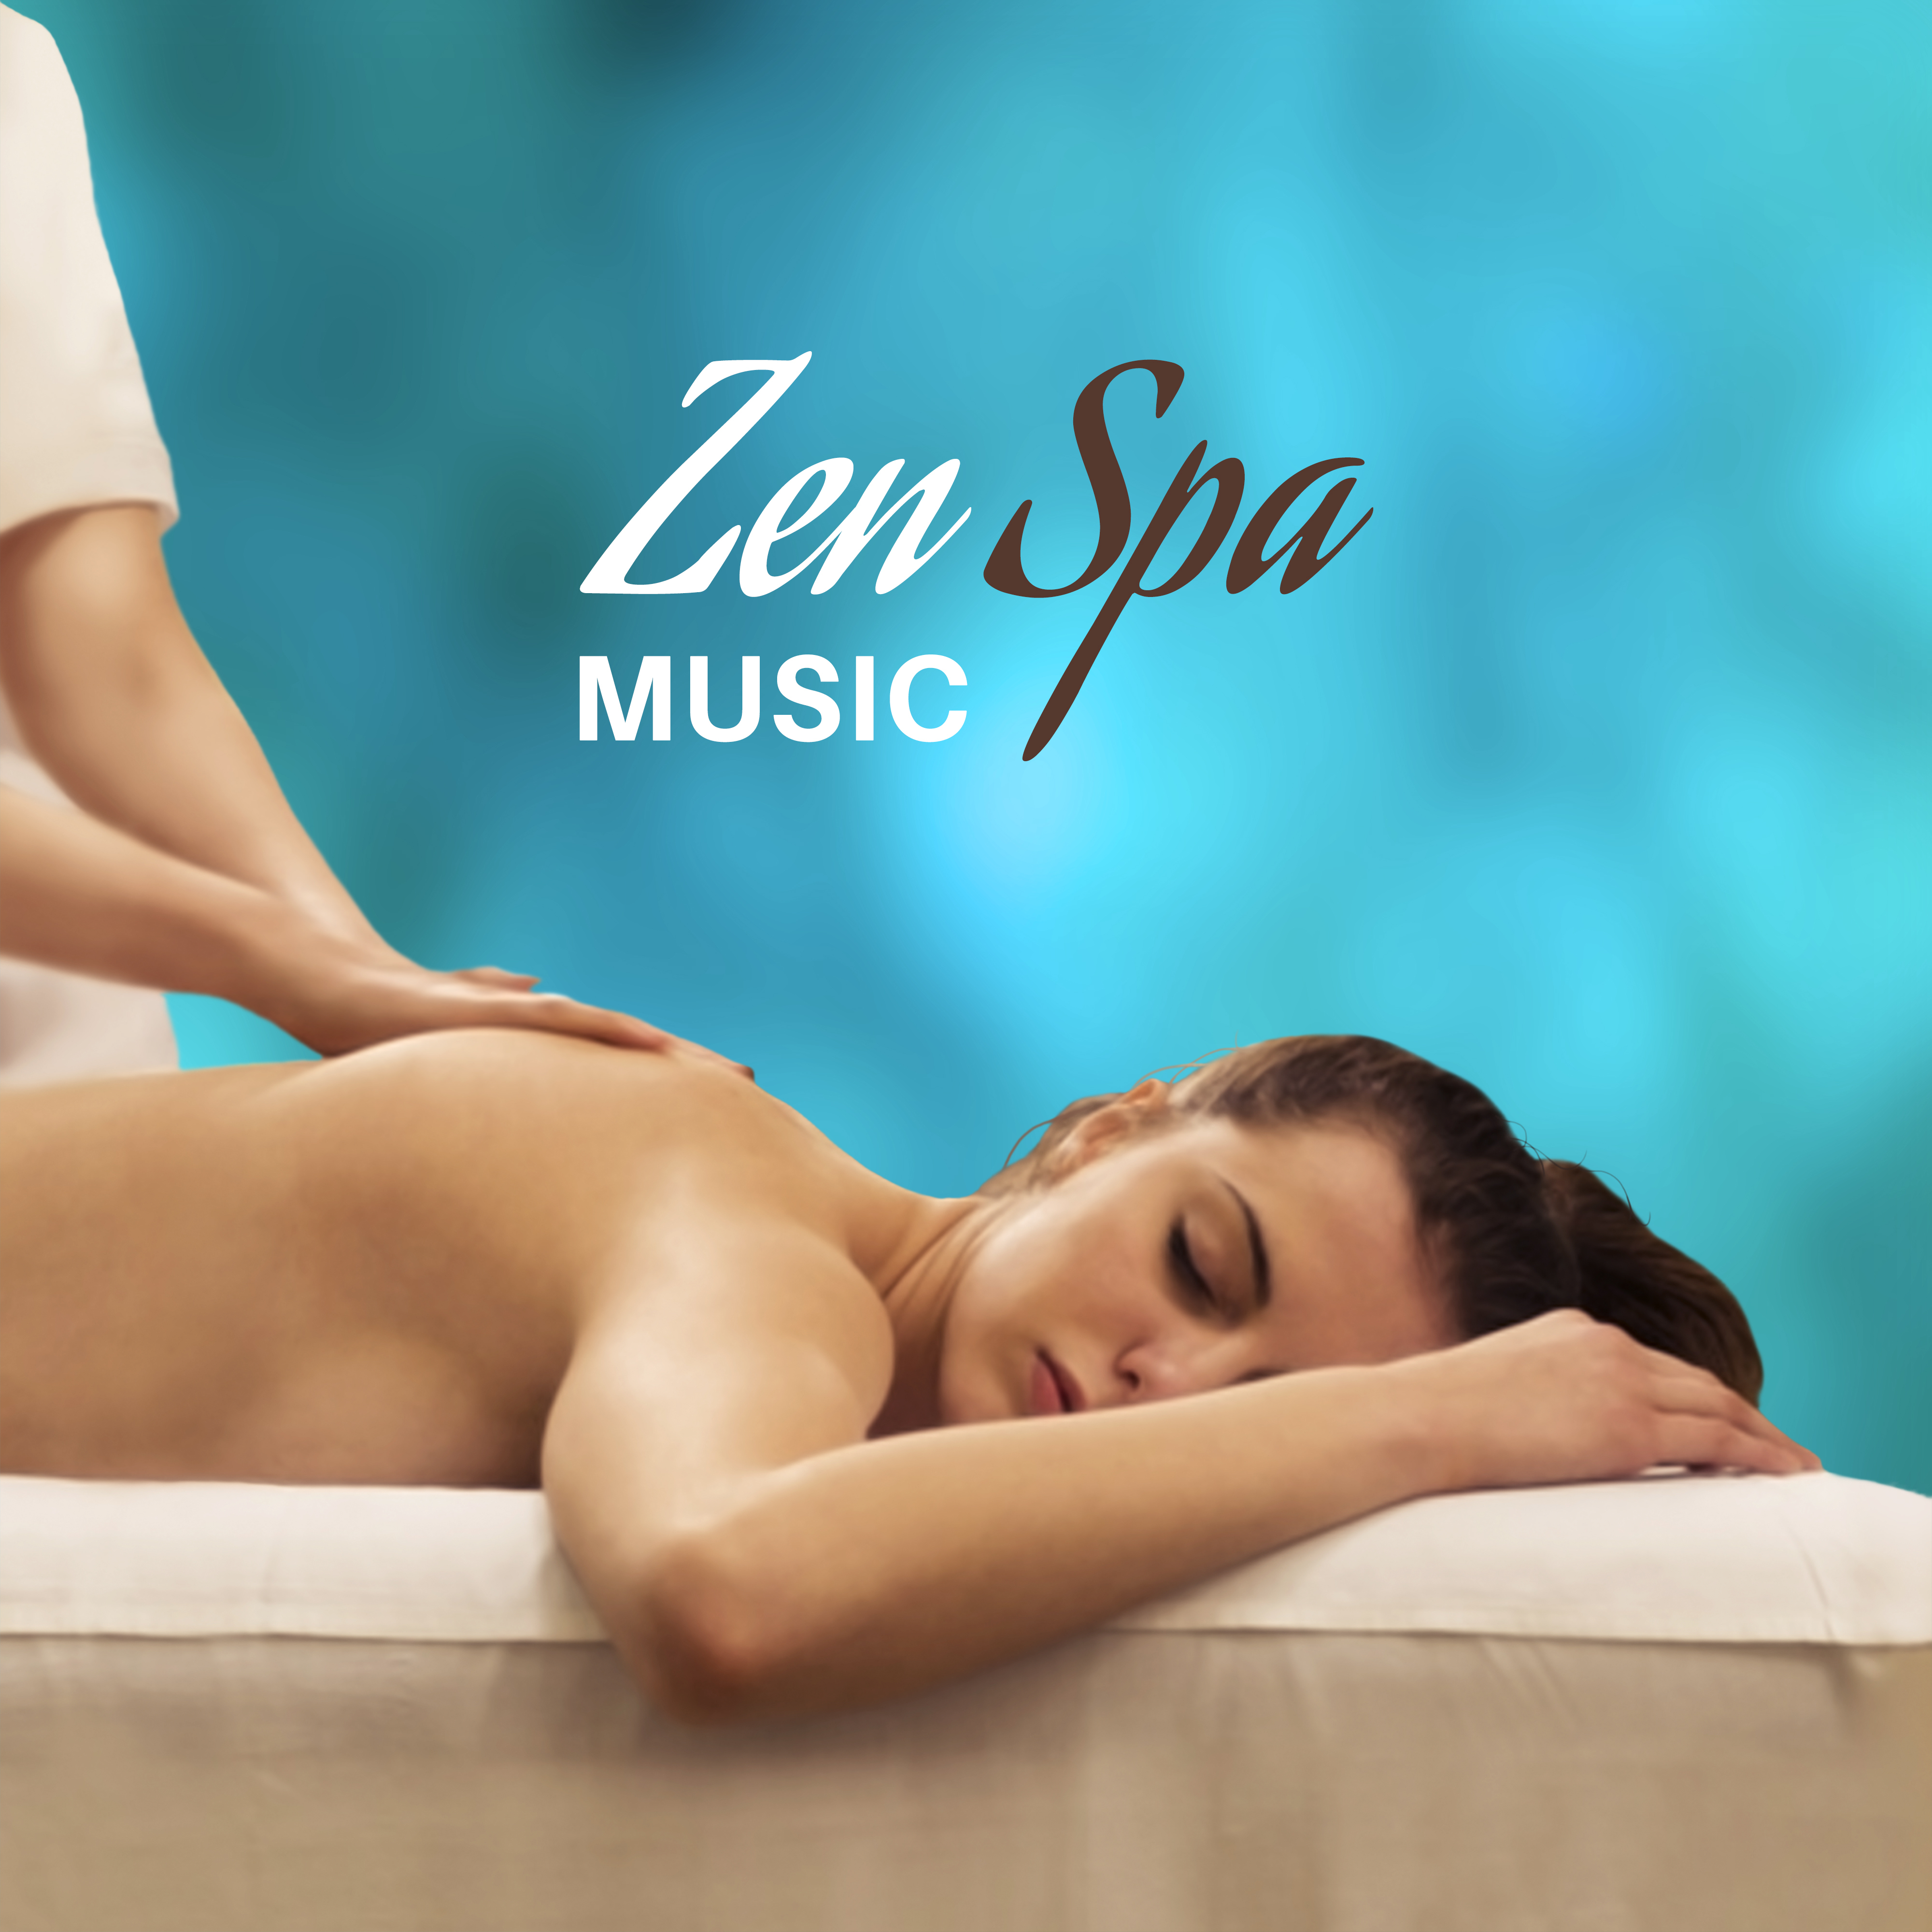 Zen Spa Music  Nature Sounds for Relaxation, Spa, Wellness, Beauty, Deep Massage, Therapy for Mind, Stress Relief